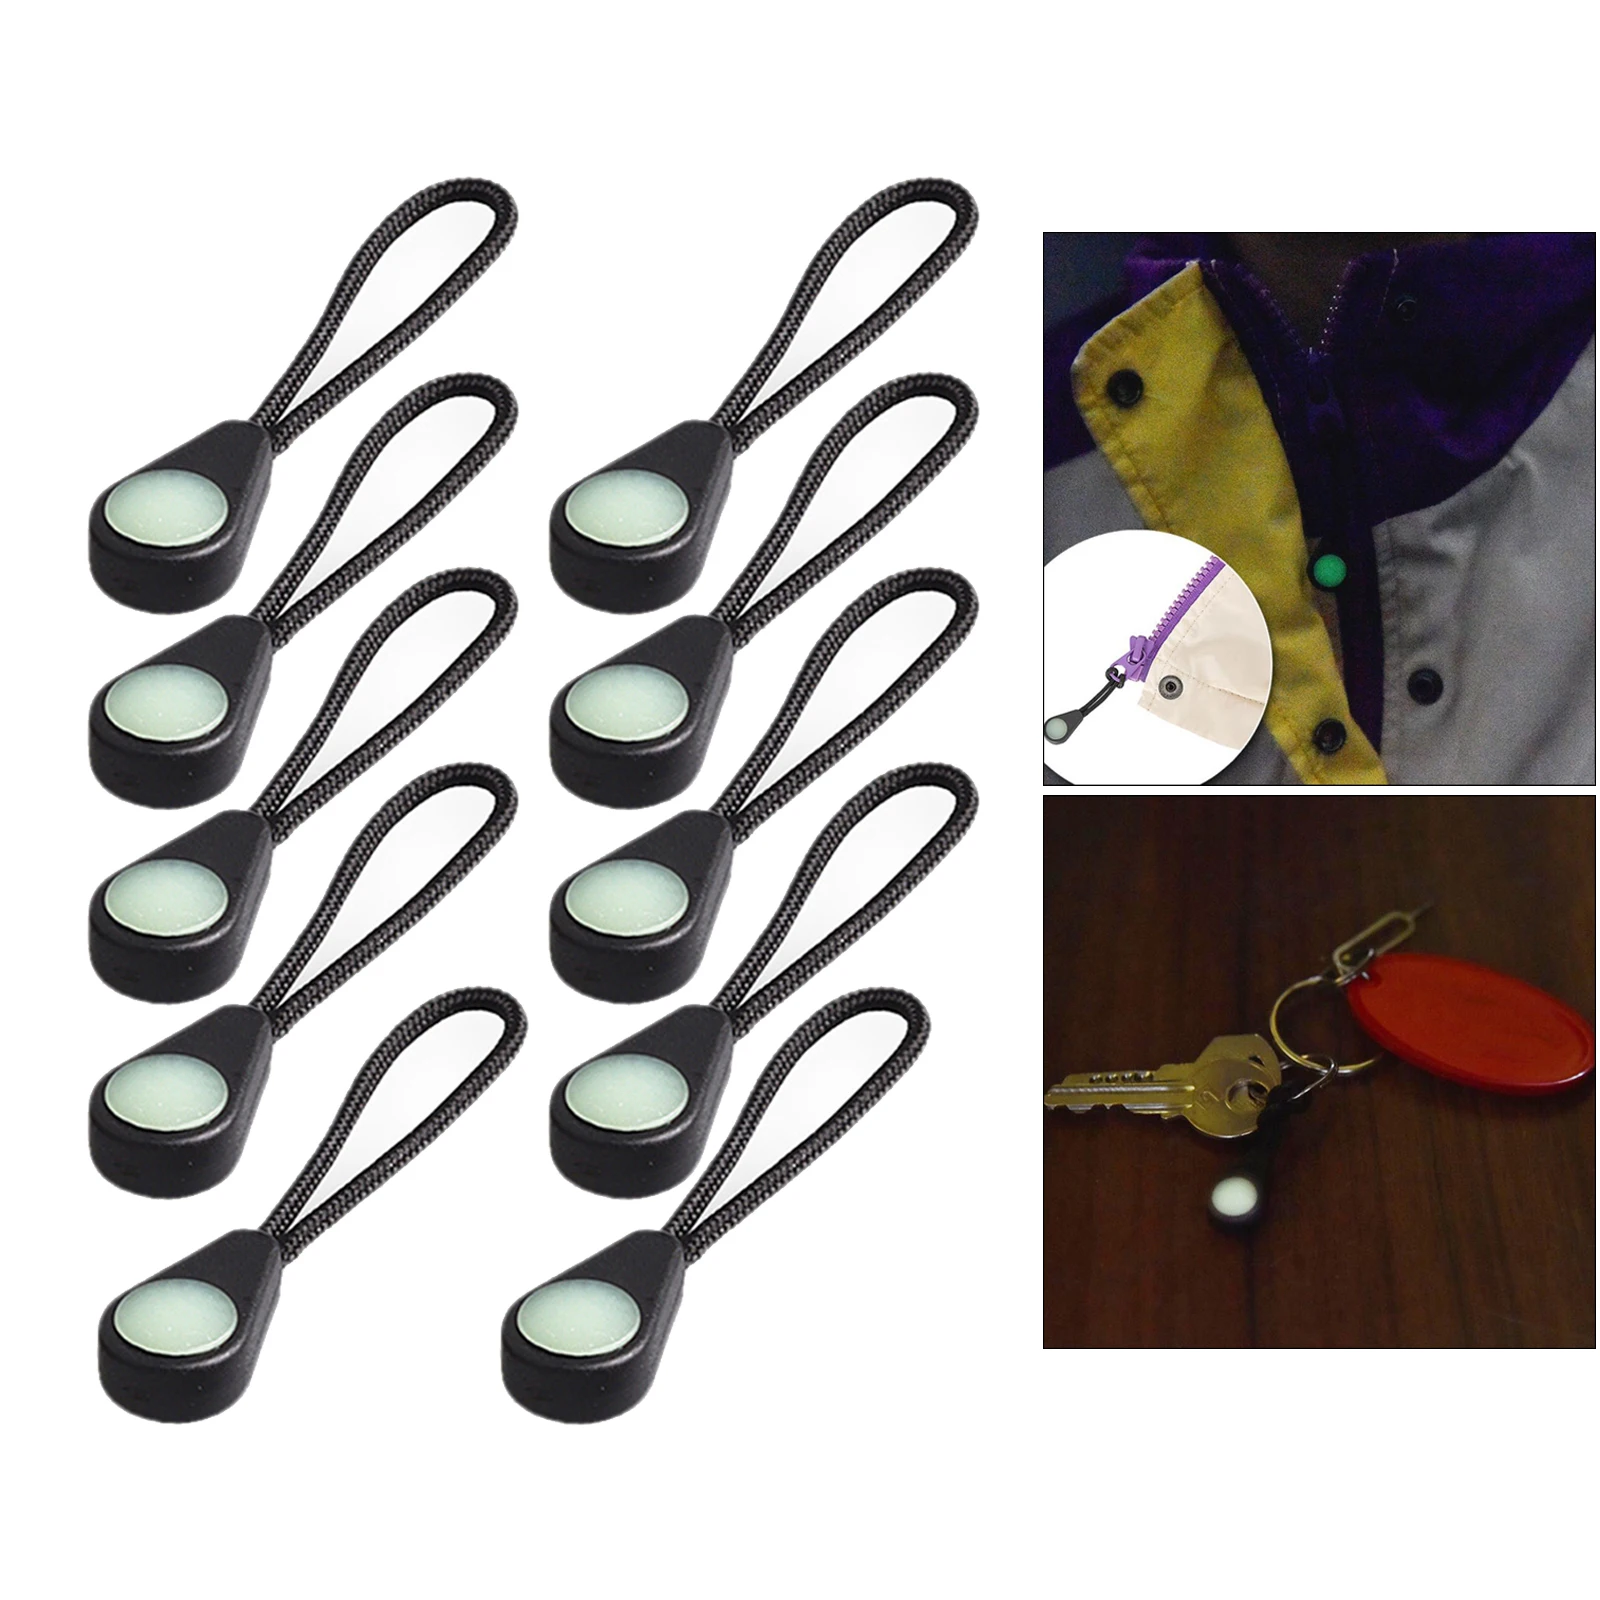 10Pack Luminous Zipper Puller Cord Zipper Tags Extension Zip for Luggage